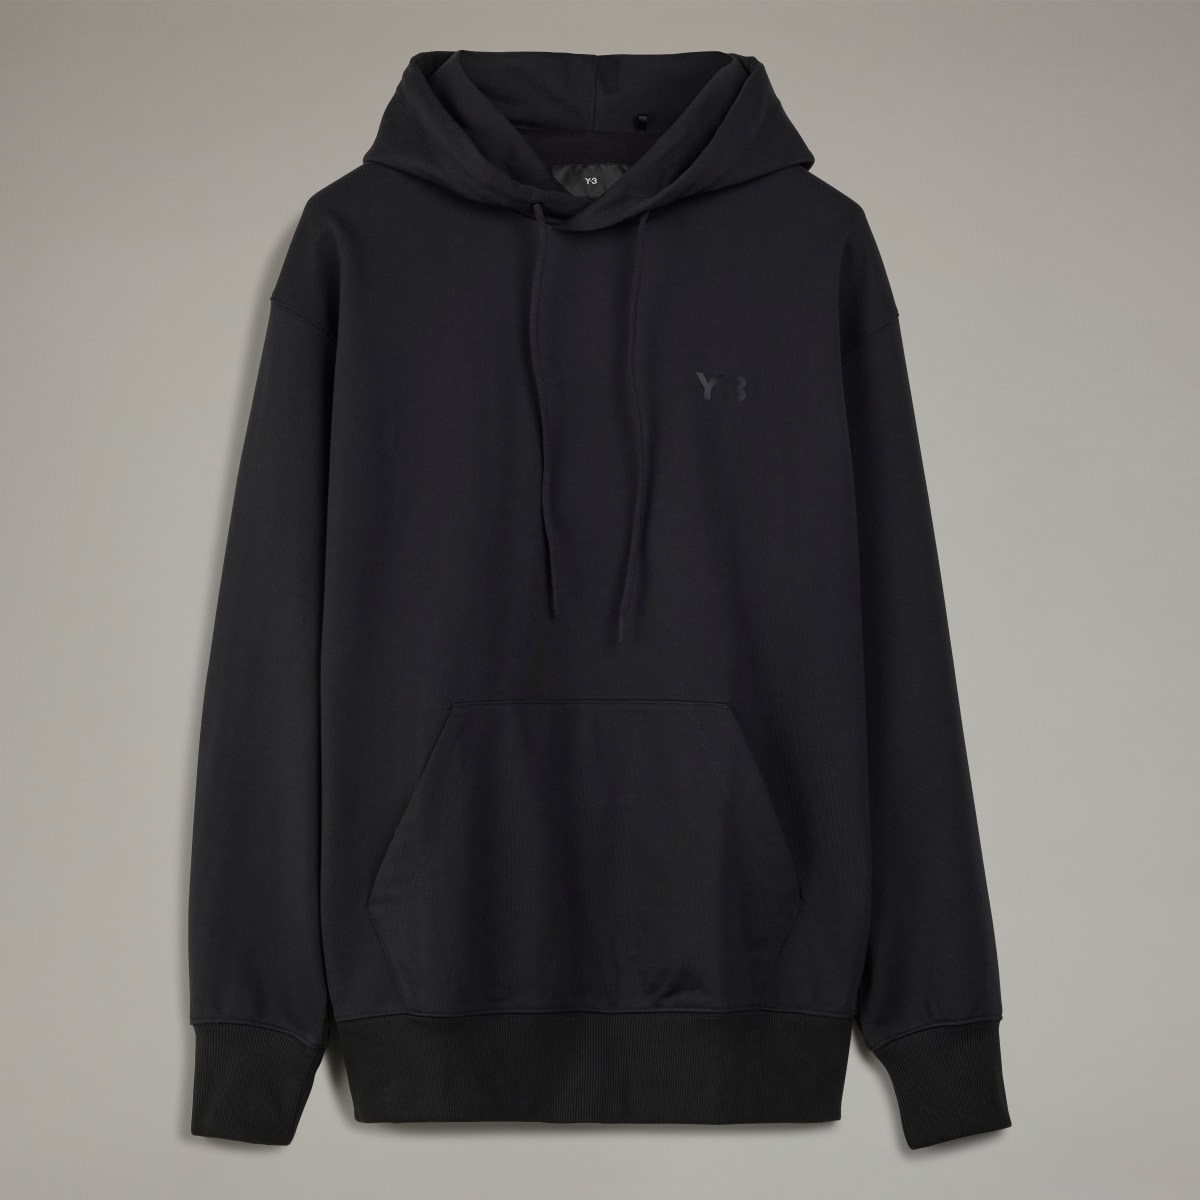 Adidas Y-3 French Terry Hoodie. 6